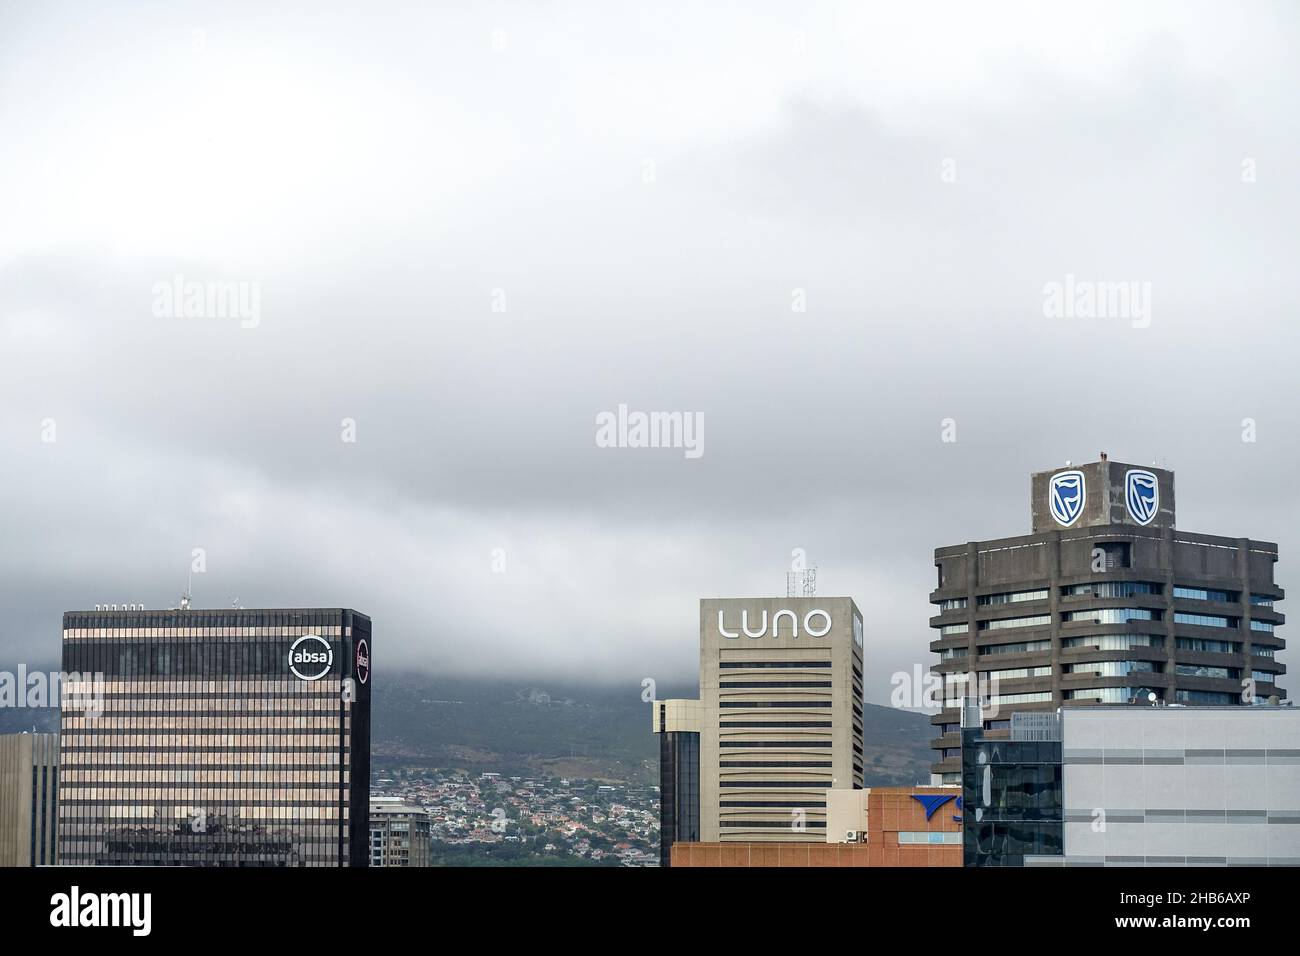 Cape Town skyline in 2021, featuring the crypto-exchange logo of Luno Stock Photo